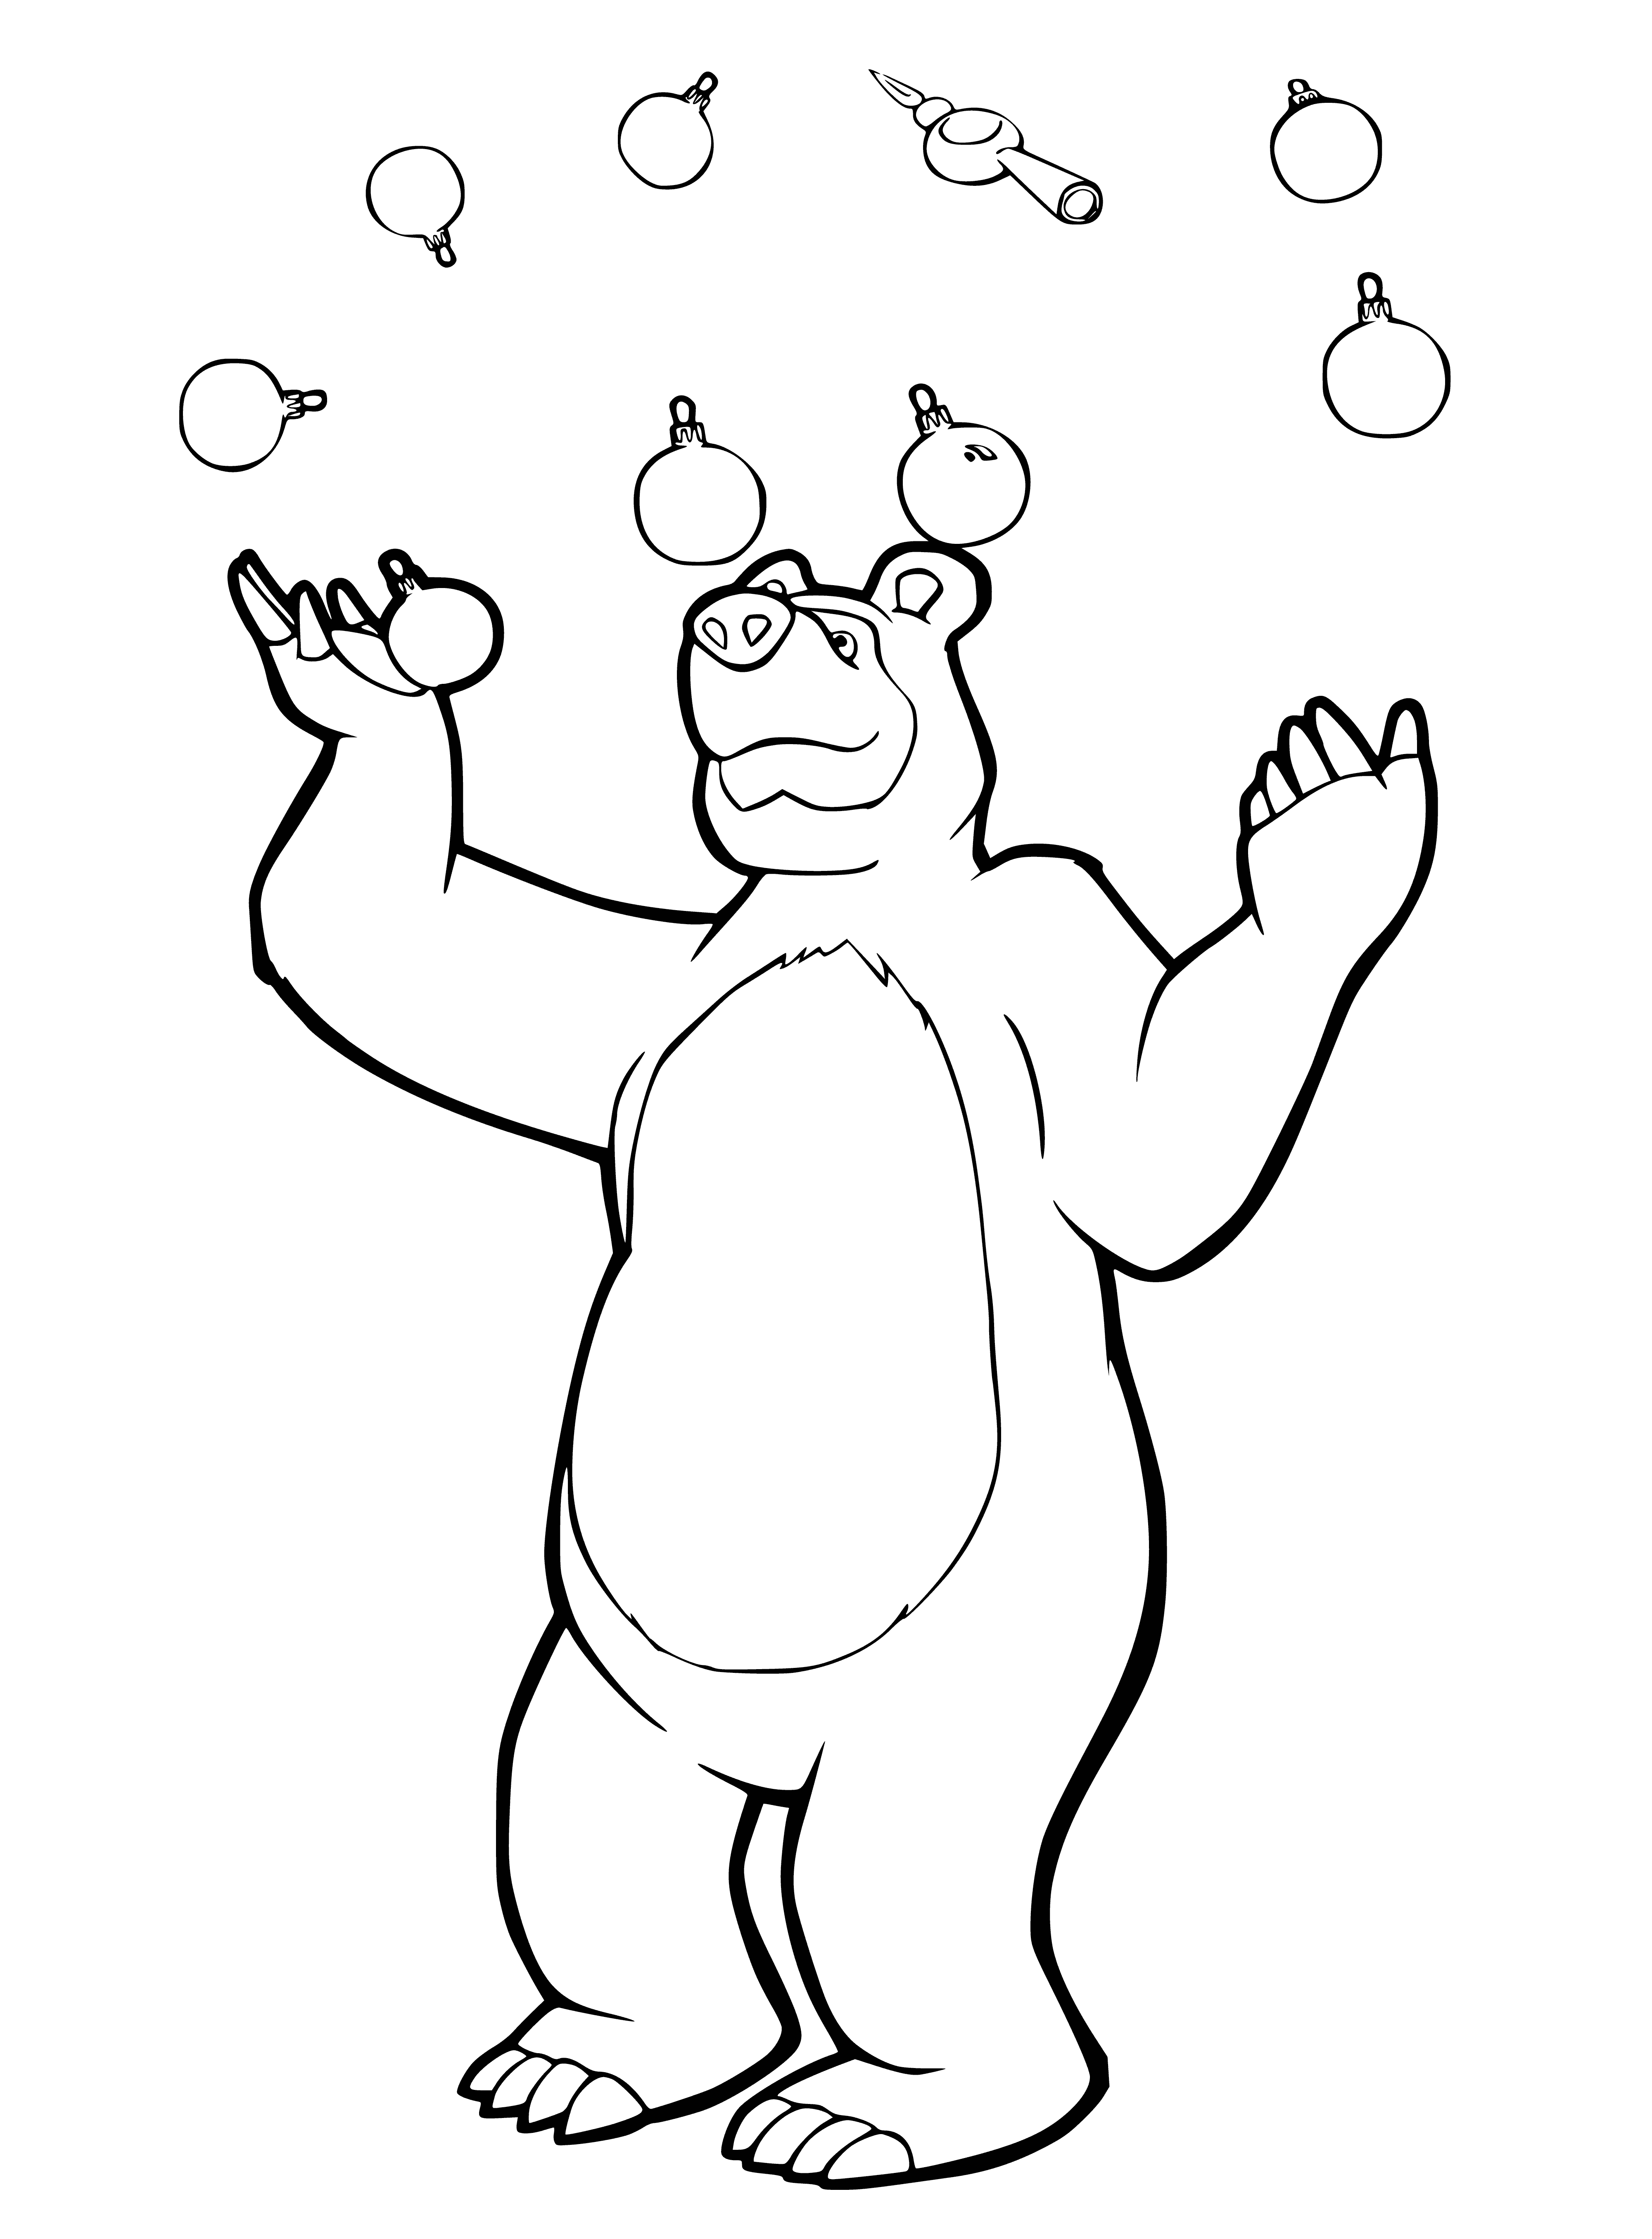 coloring page: Little girl Masha stands next to a bear juggling three red balls, wearing a red scarf.